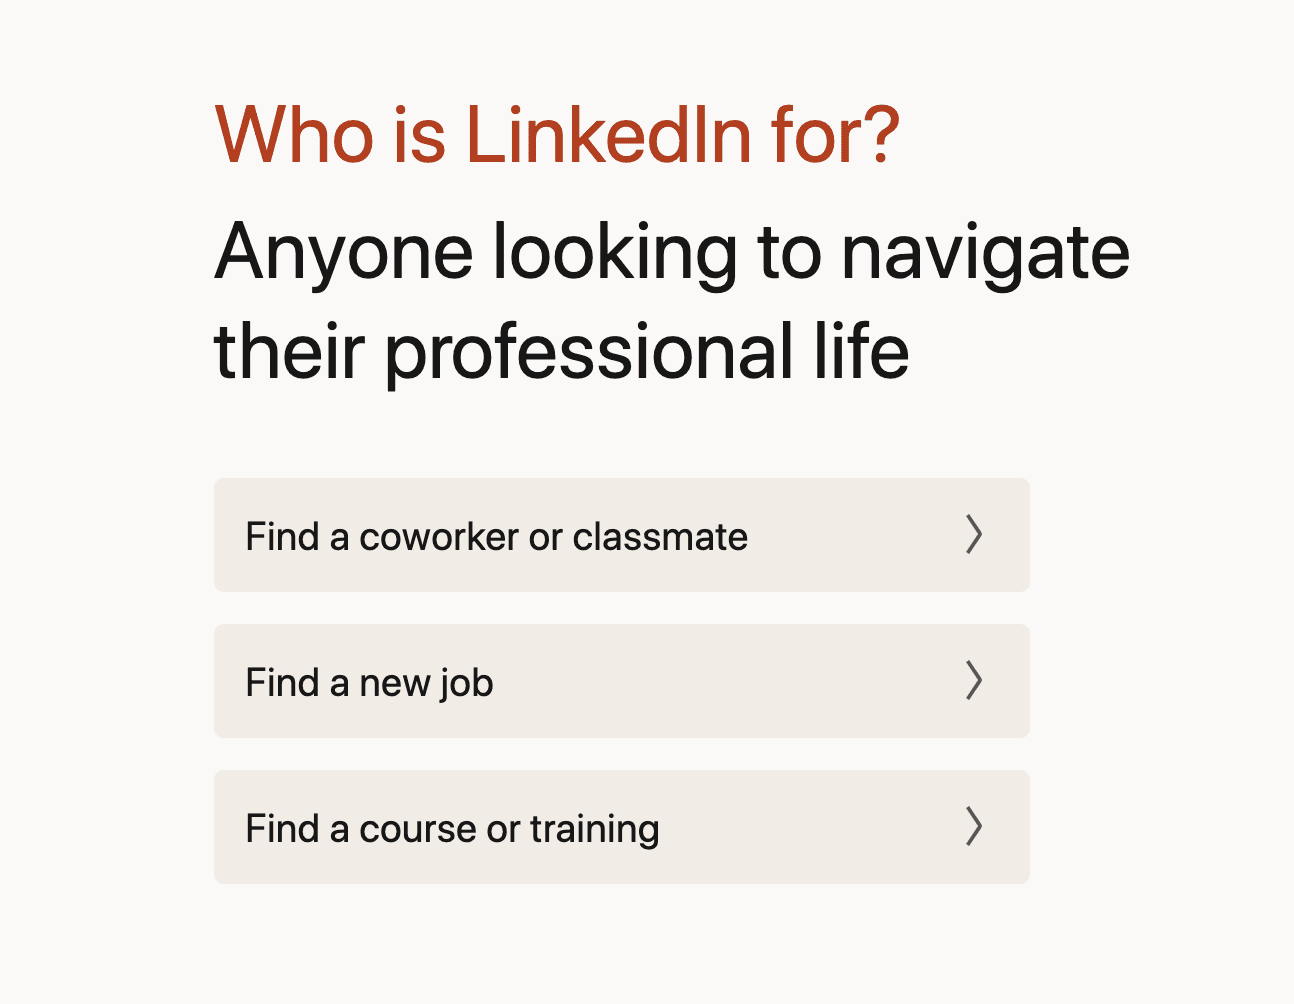 Example of a navigation menu from LinkedIn